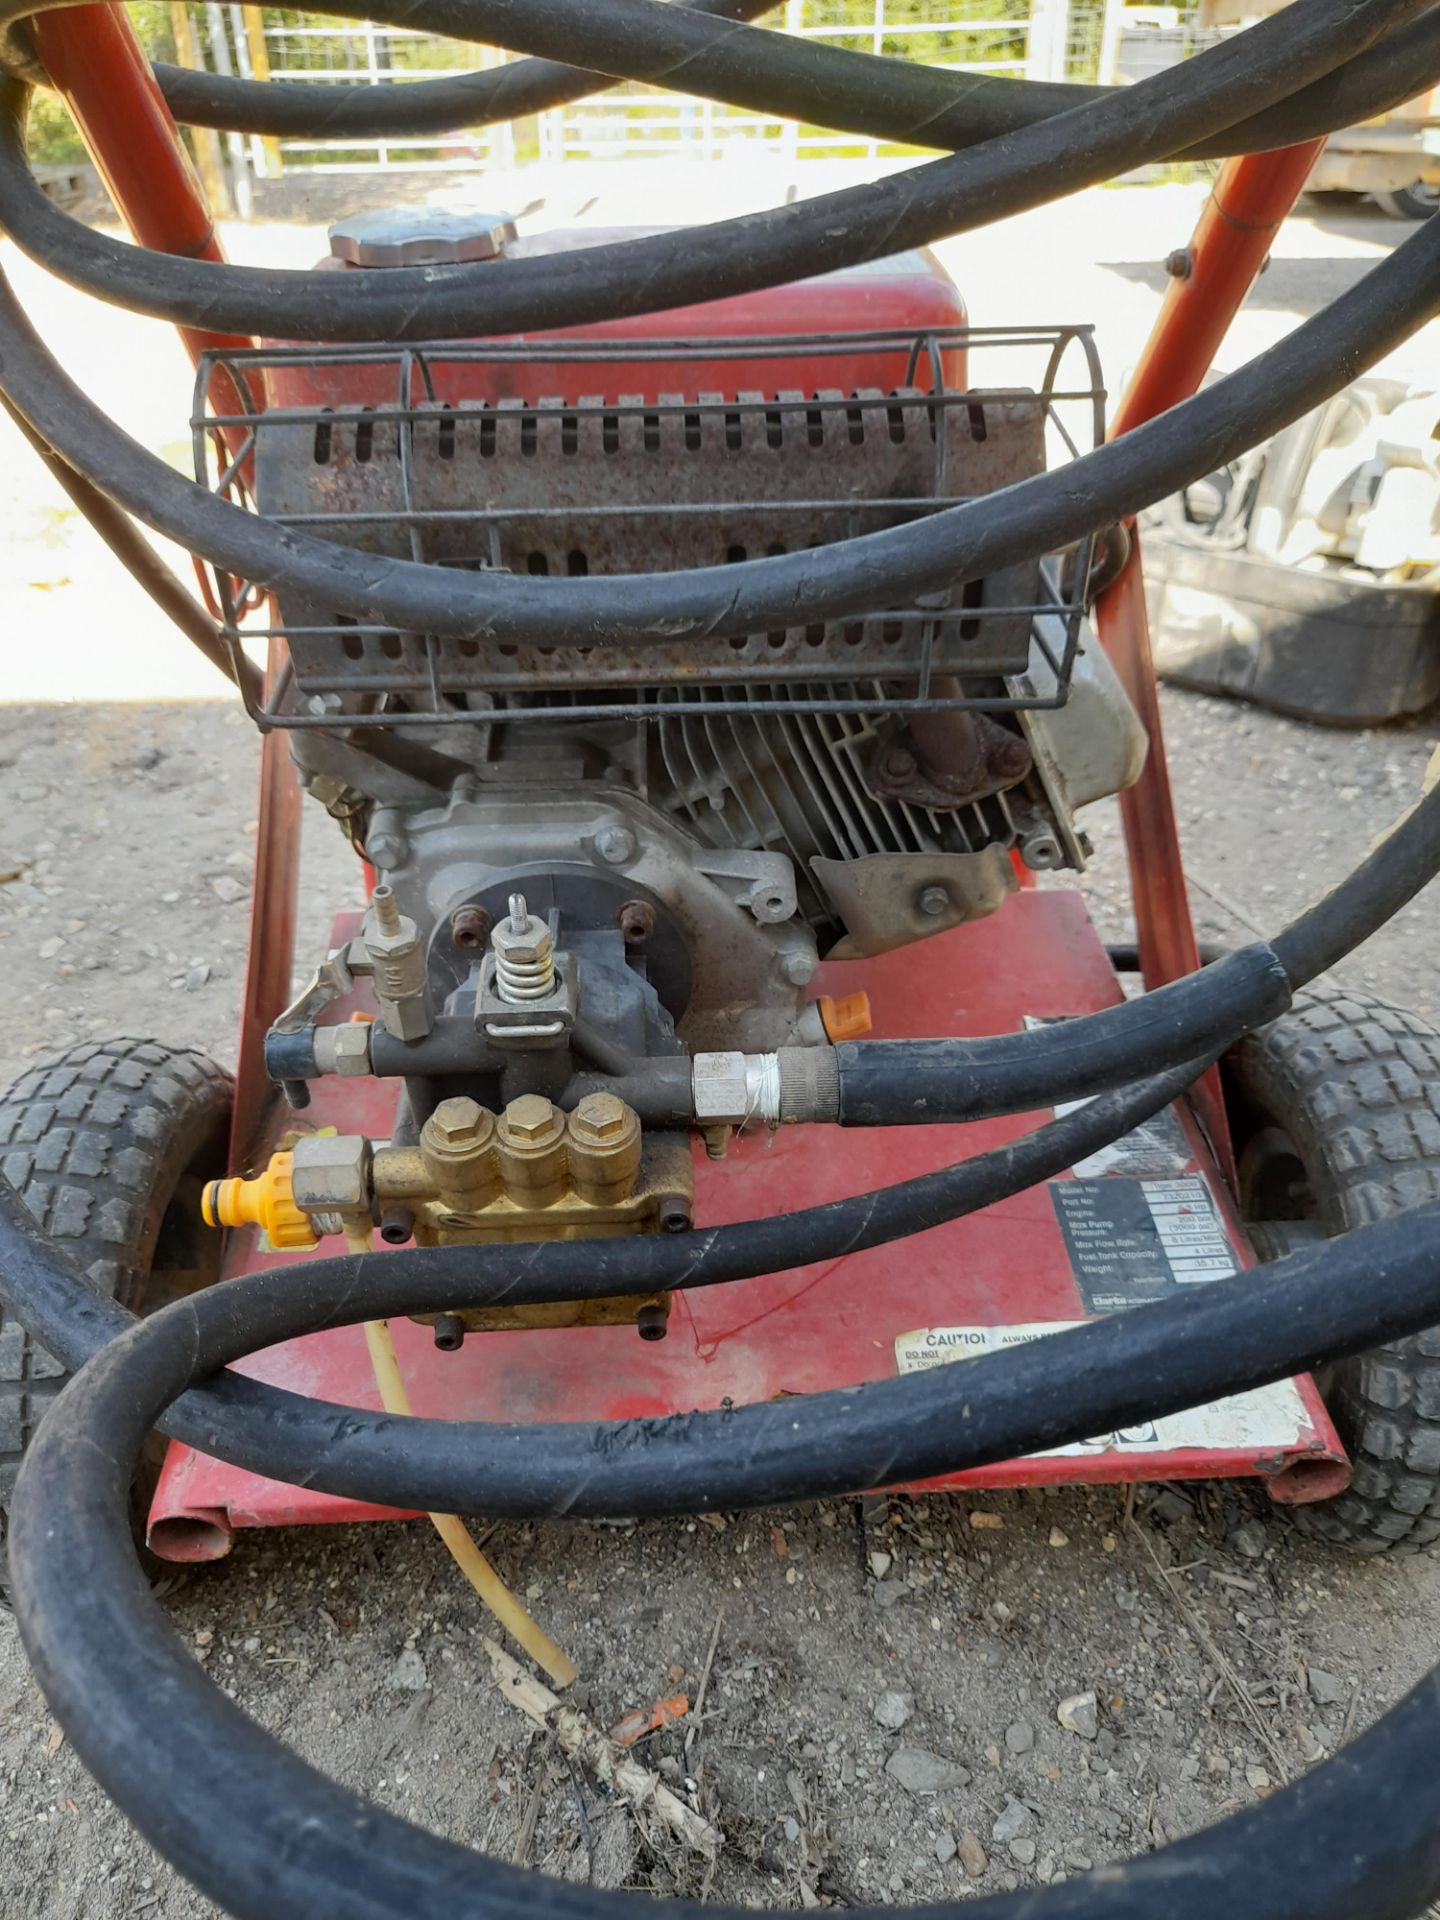 Clarke Tiger 3000 Petrol Pressure Washer Serial Number 7320210 with Chrome Industrial Patio - Image 4 of 7